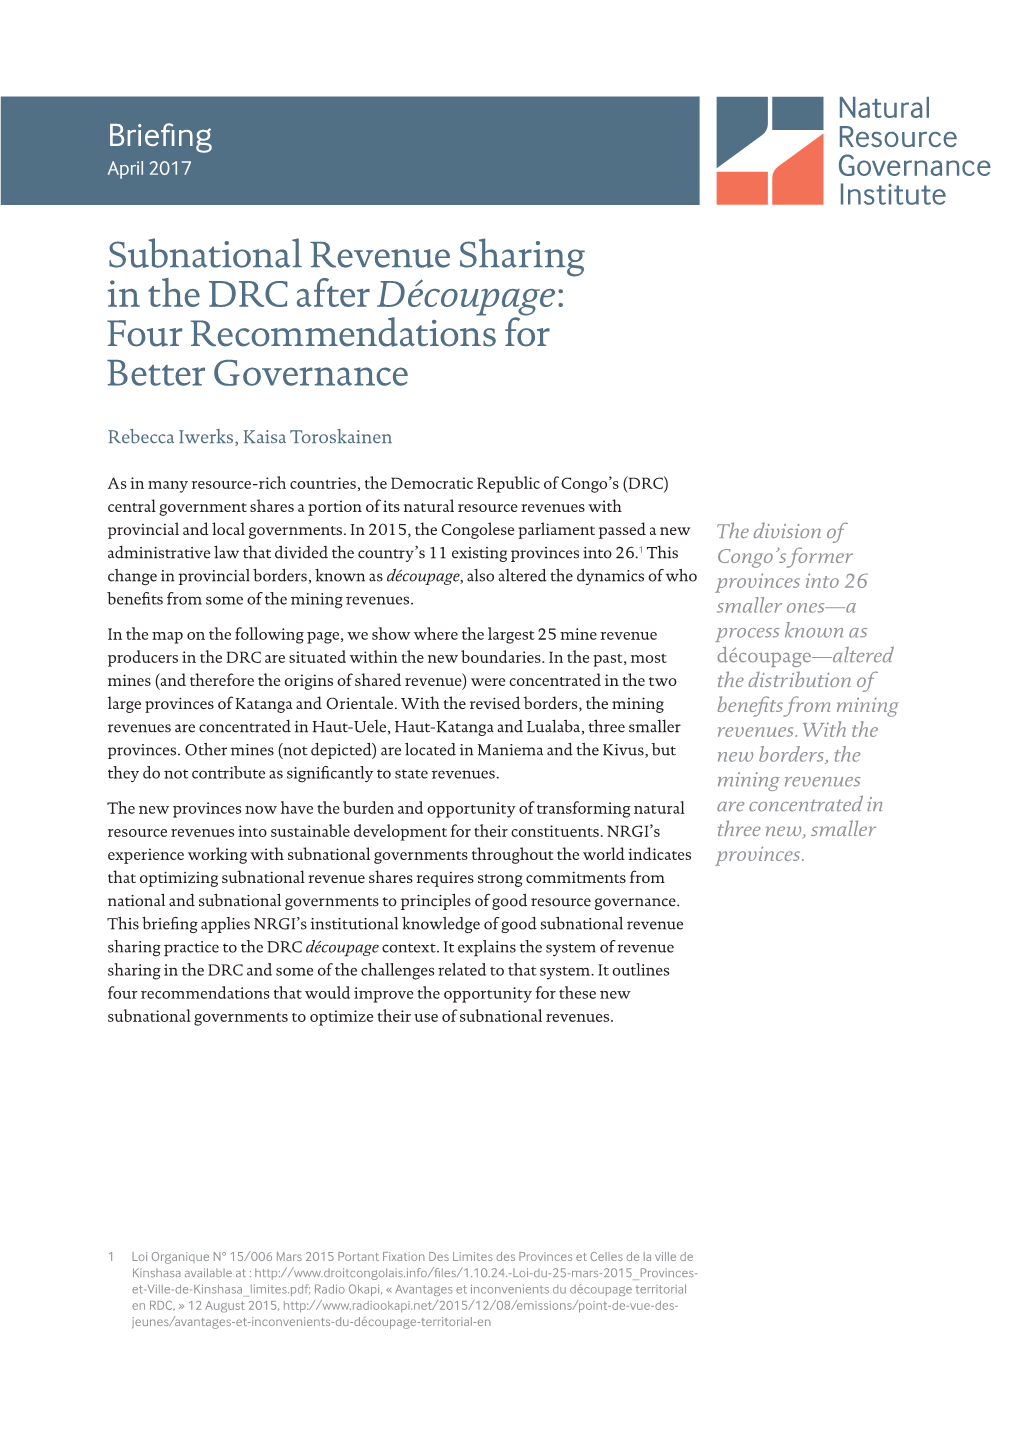 Subnational Revenue Sharing in the DRC After Découpage: Four Recommendations for Better Governance